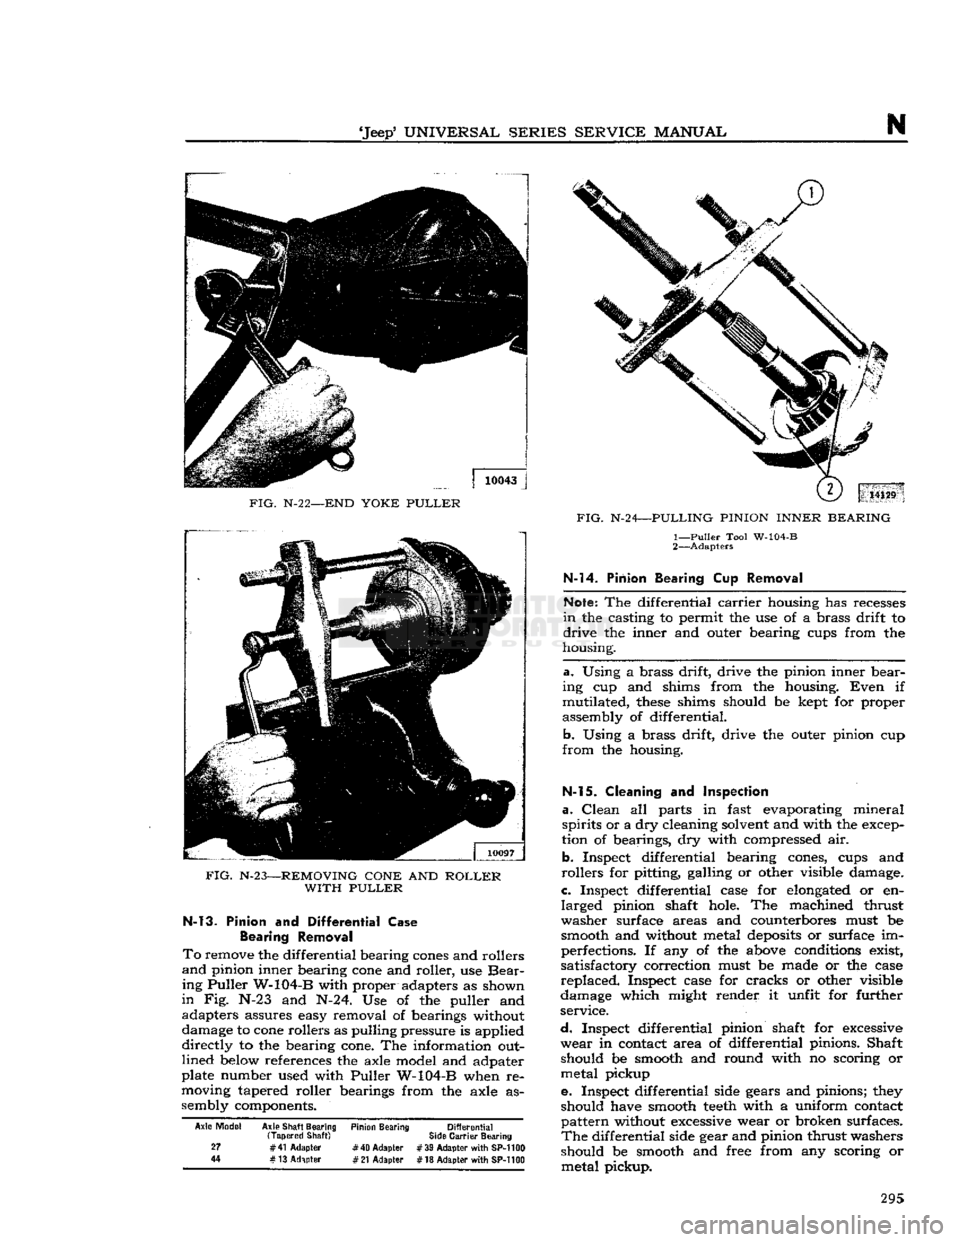 JEEP CJ 1953 User Guide 
Jeep*
 UNIVERSAL
 SERIES SERVICE
 MANUAL 

N 

FIG.
 N-2
 2—END
 YOKE PULLER 

FIG.
 N-23—REMOVING
 CONE
 AND
 ROLLER 
 WITH
 PULLER 
 N-13. Pinion
 and
 Differential
 Case 

Bearing
 Removal 

